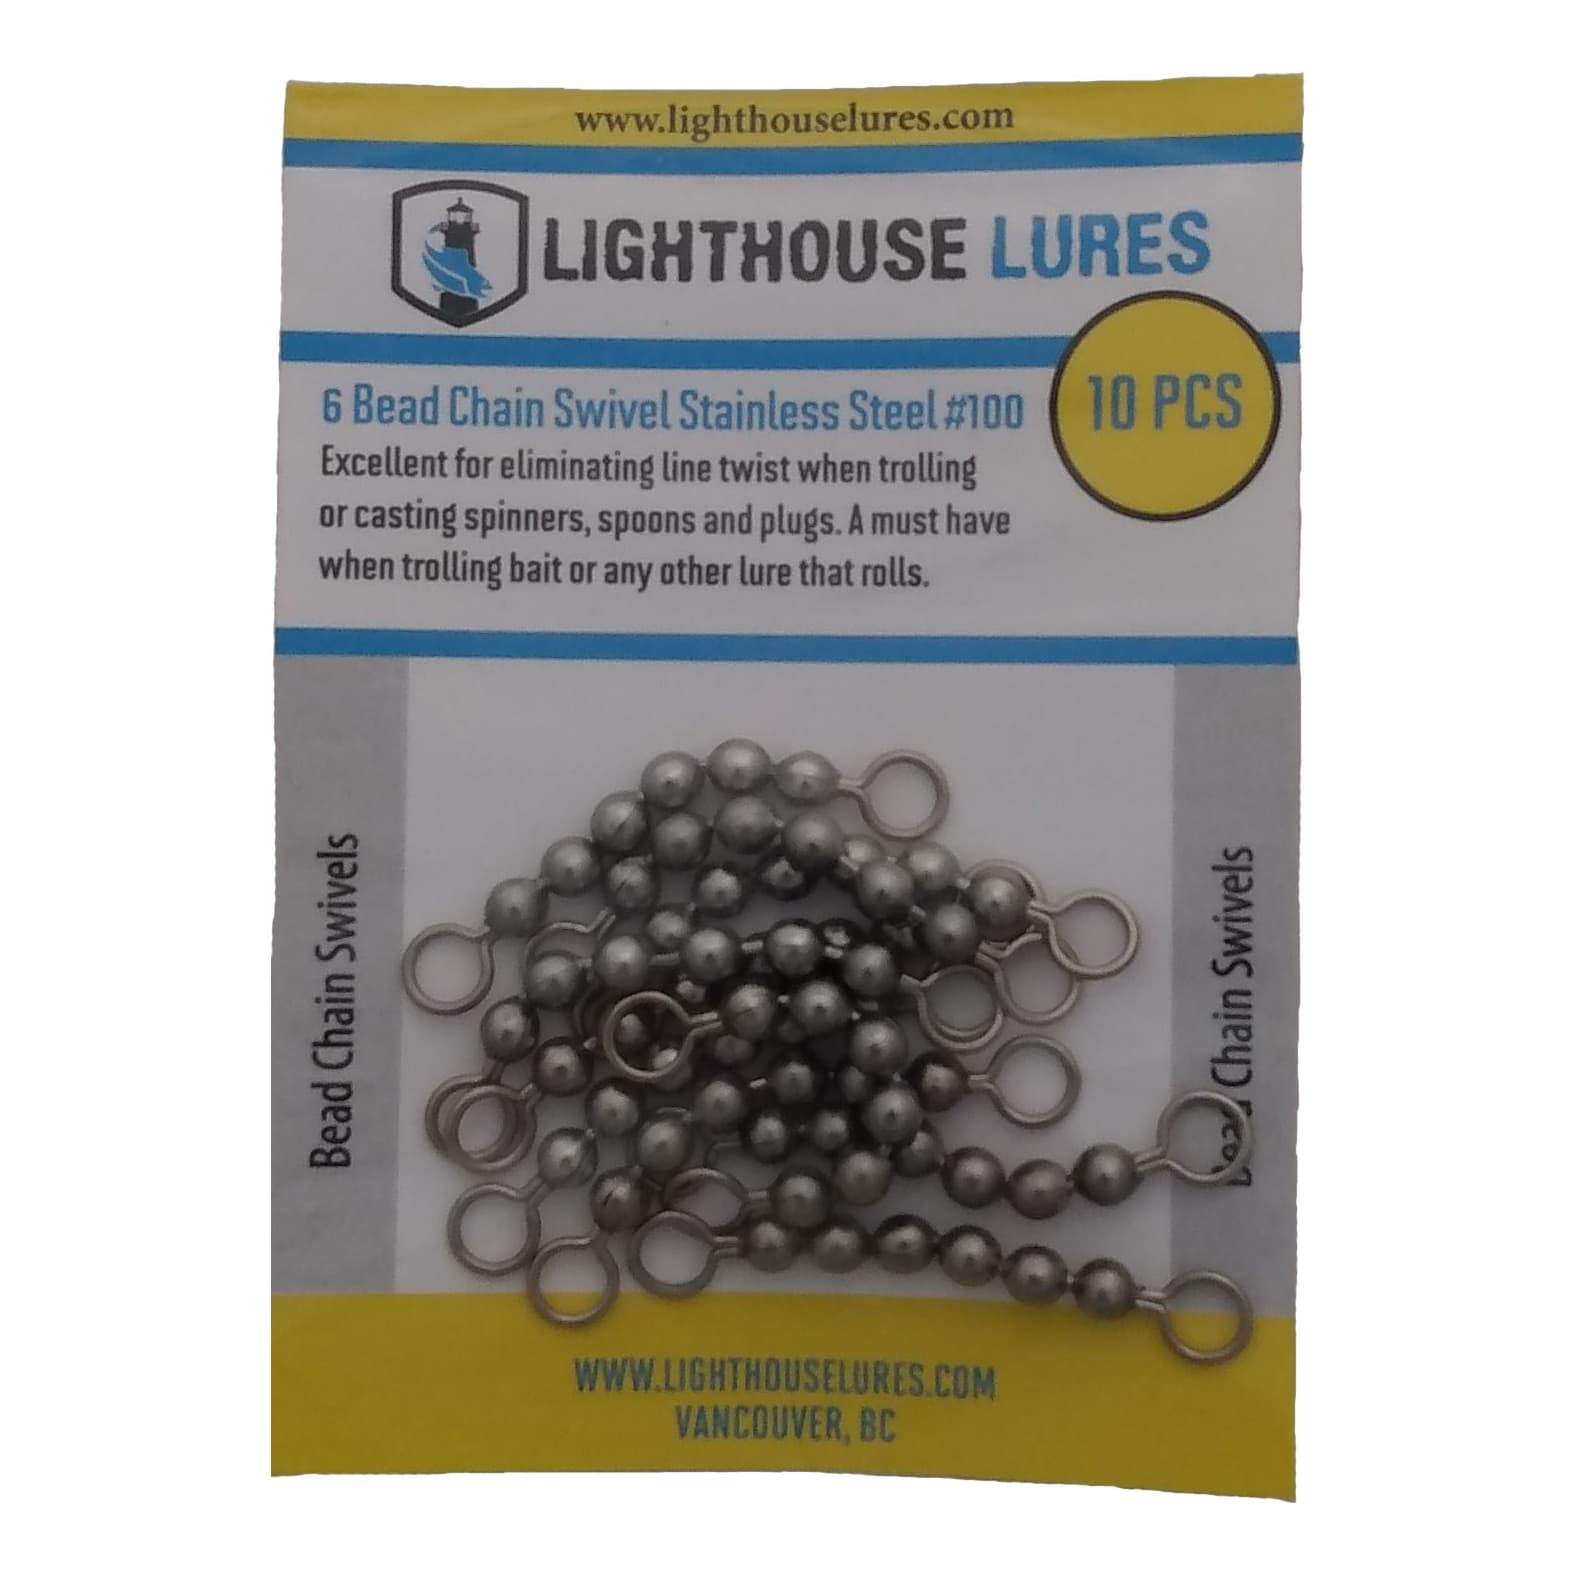 Lighthouse Lures Stainless Steel Bead Chain Swivels